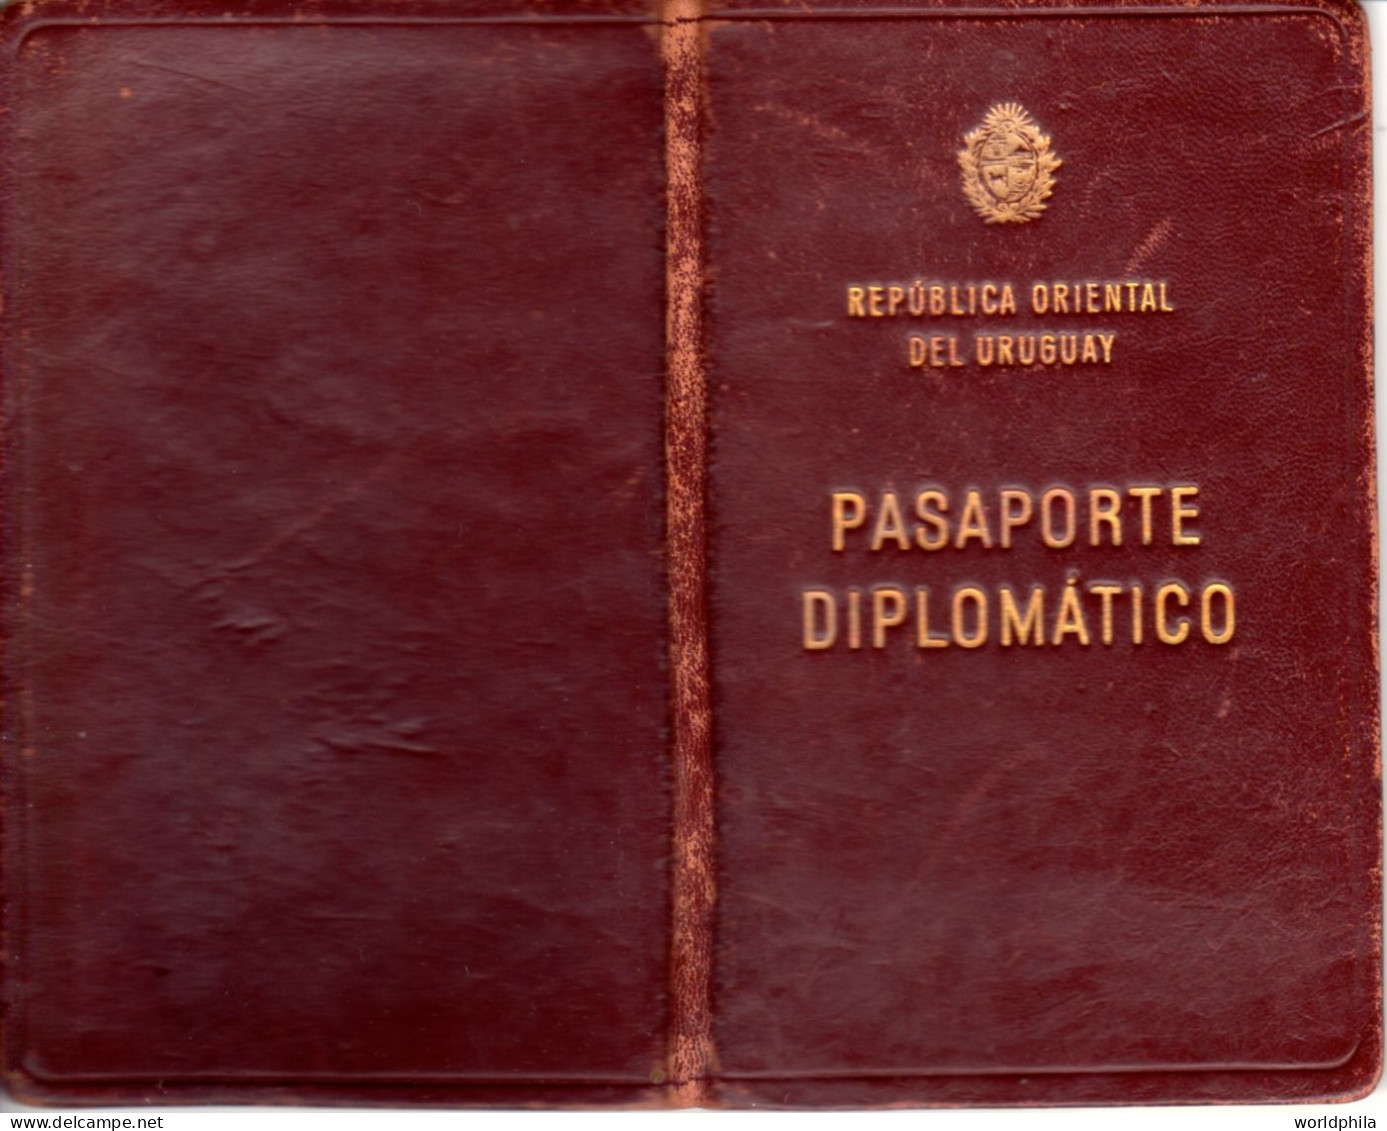 Uruguay End of WWII 1945-9 much travelled document, Europe & Latin America, signed Diplomatic Passport History document